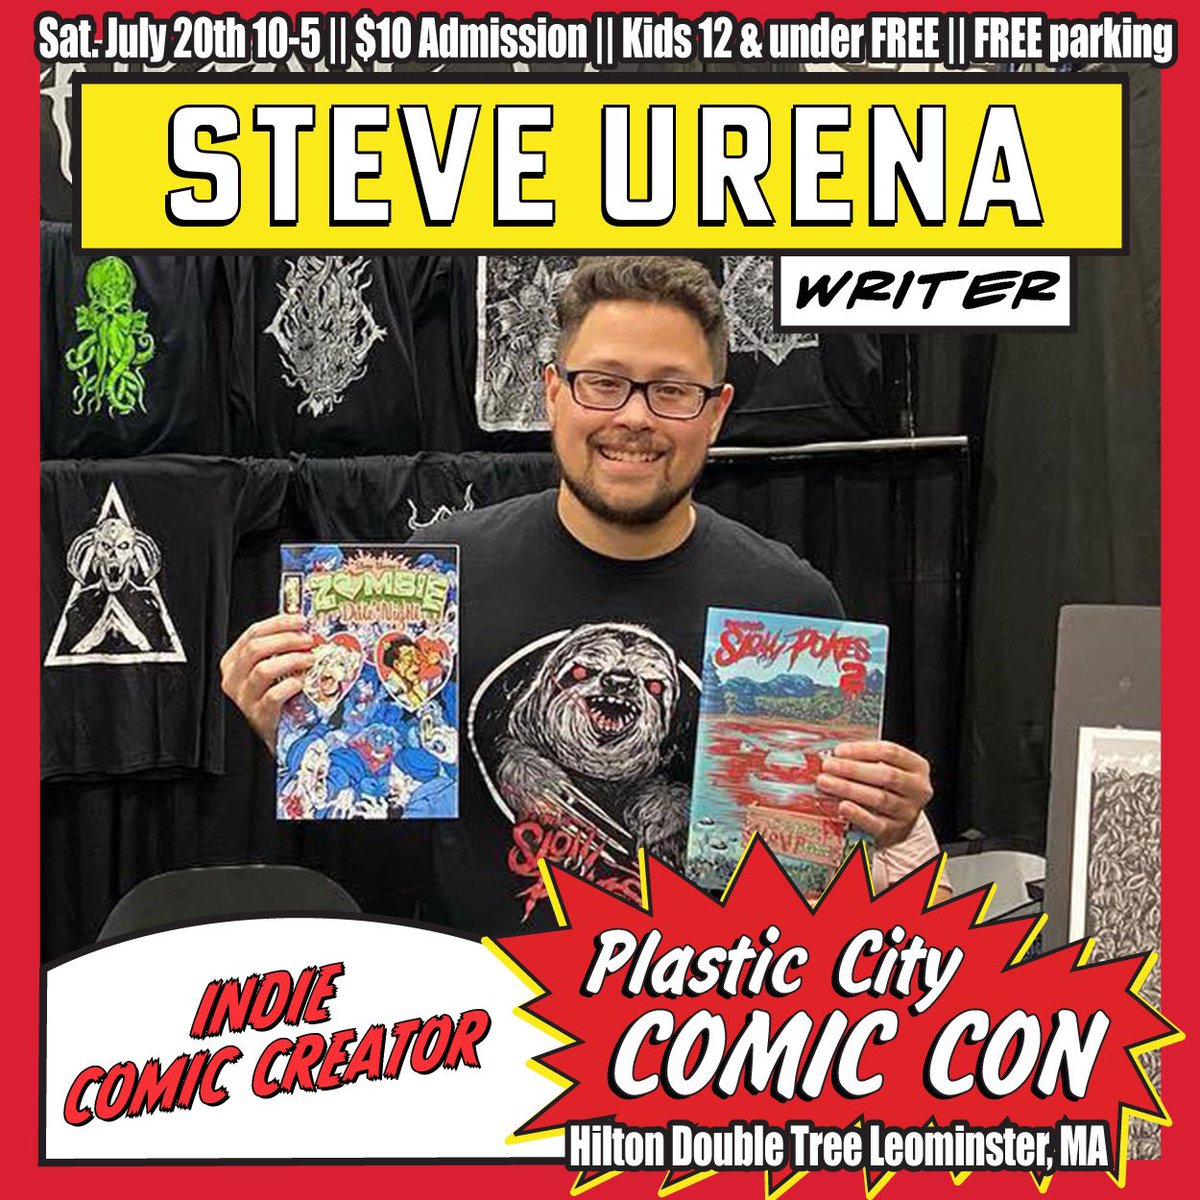 Let’s keep the announcements coming! I am excited to announce that I am going to be signing and selling my #comics at @PlasticCityCon in #Massachusetts this July! If you’re in the area, come say hello!

#indiecomics #comicbooks #comics #indiecomic #comiccon #comicconvention